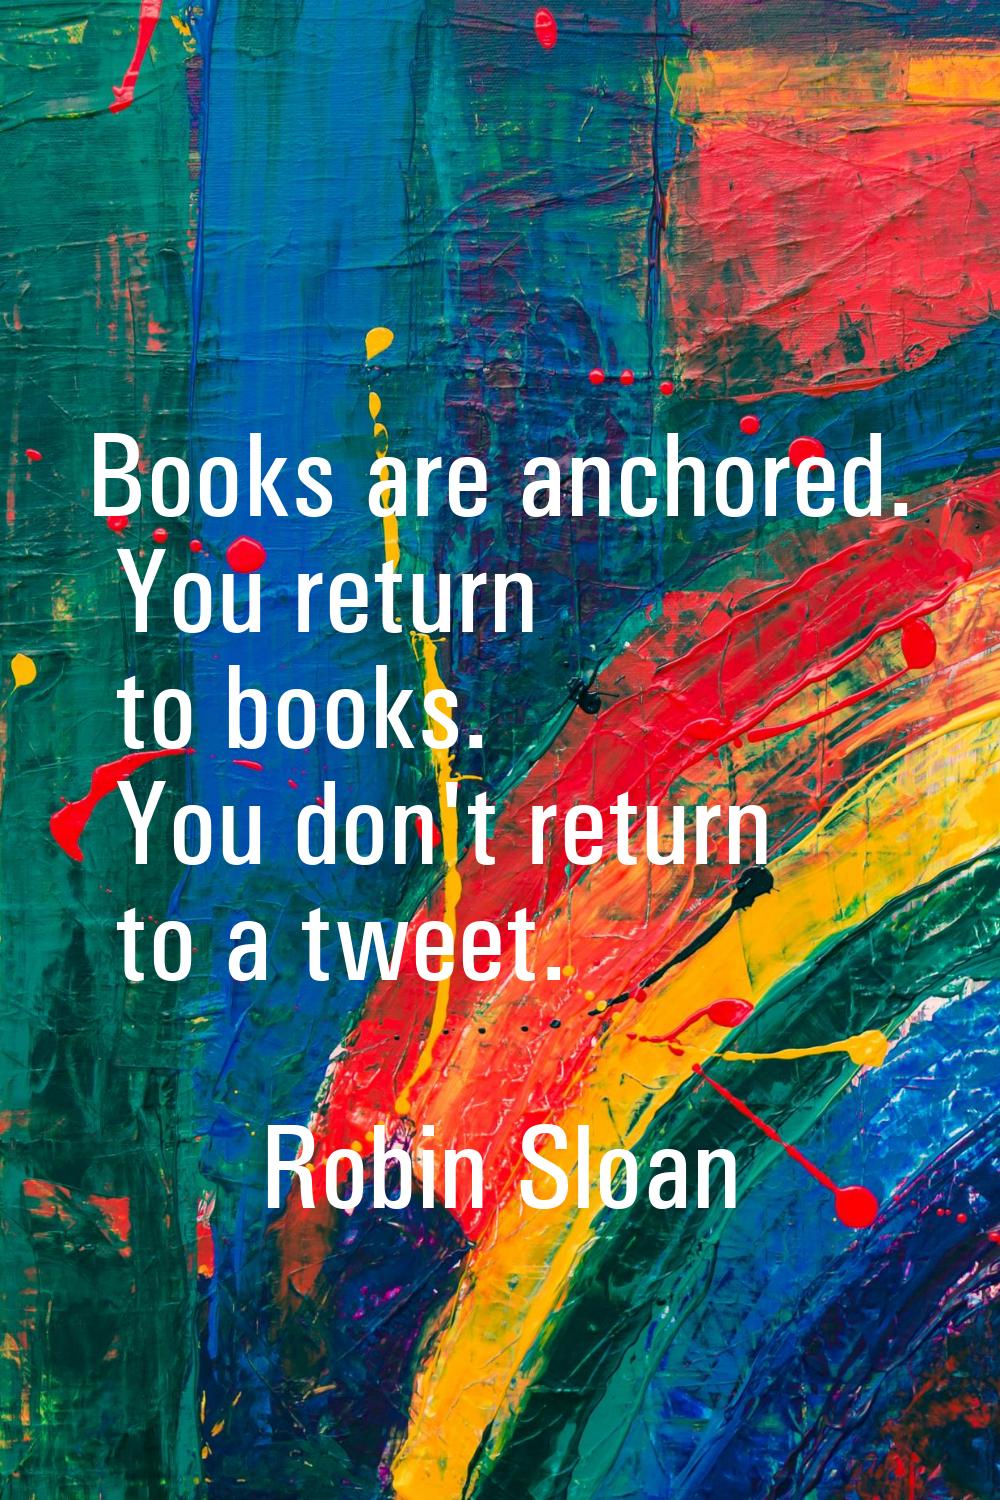 Books are anchored. You return to books. You don't return to a tweet.